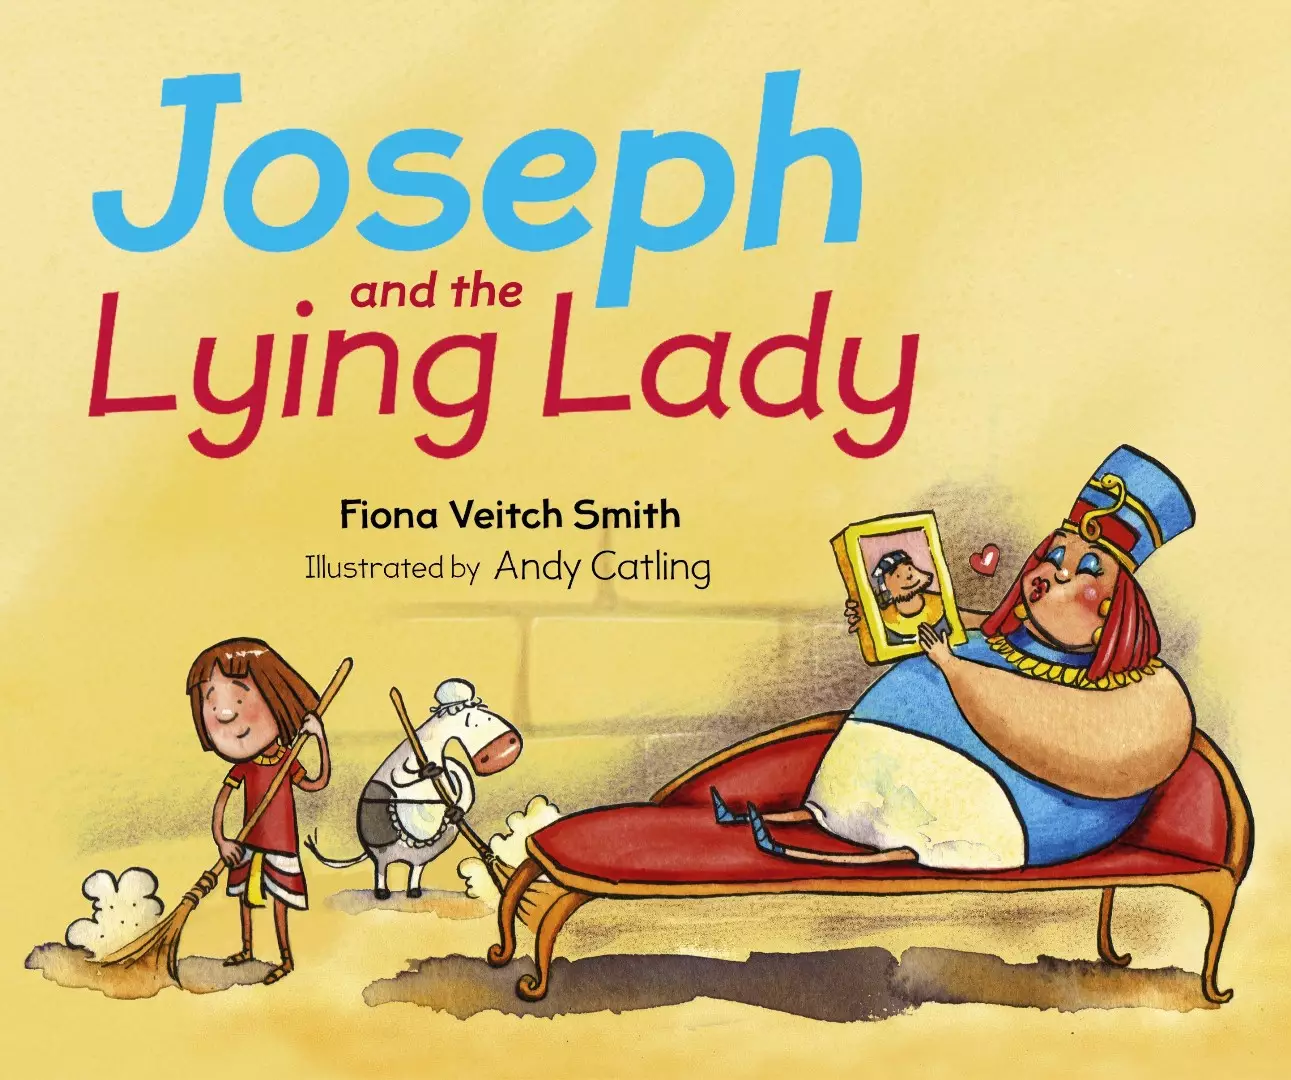 Joseph and the Lying Lady